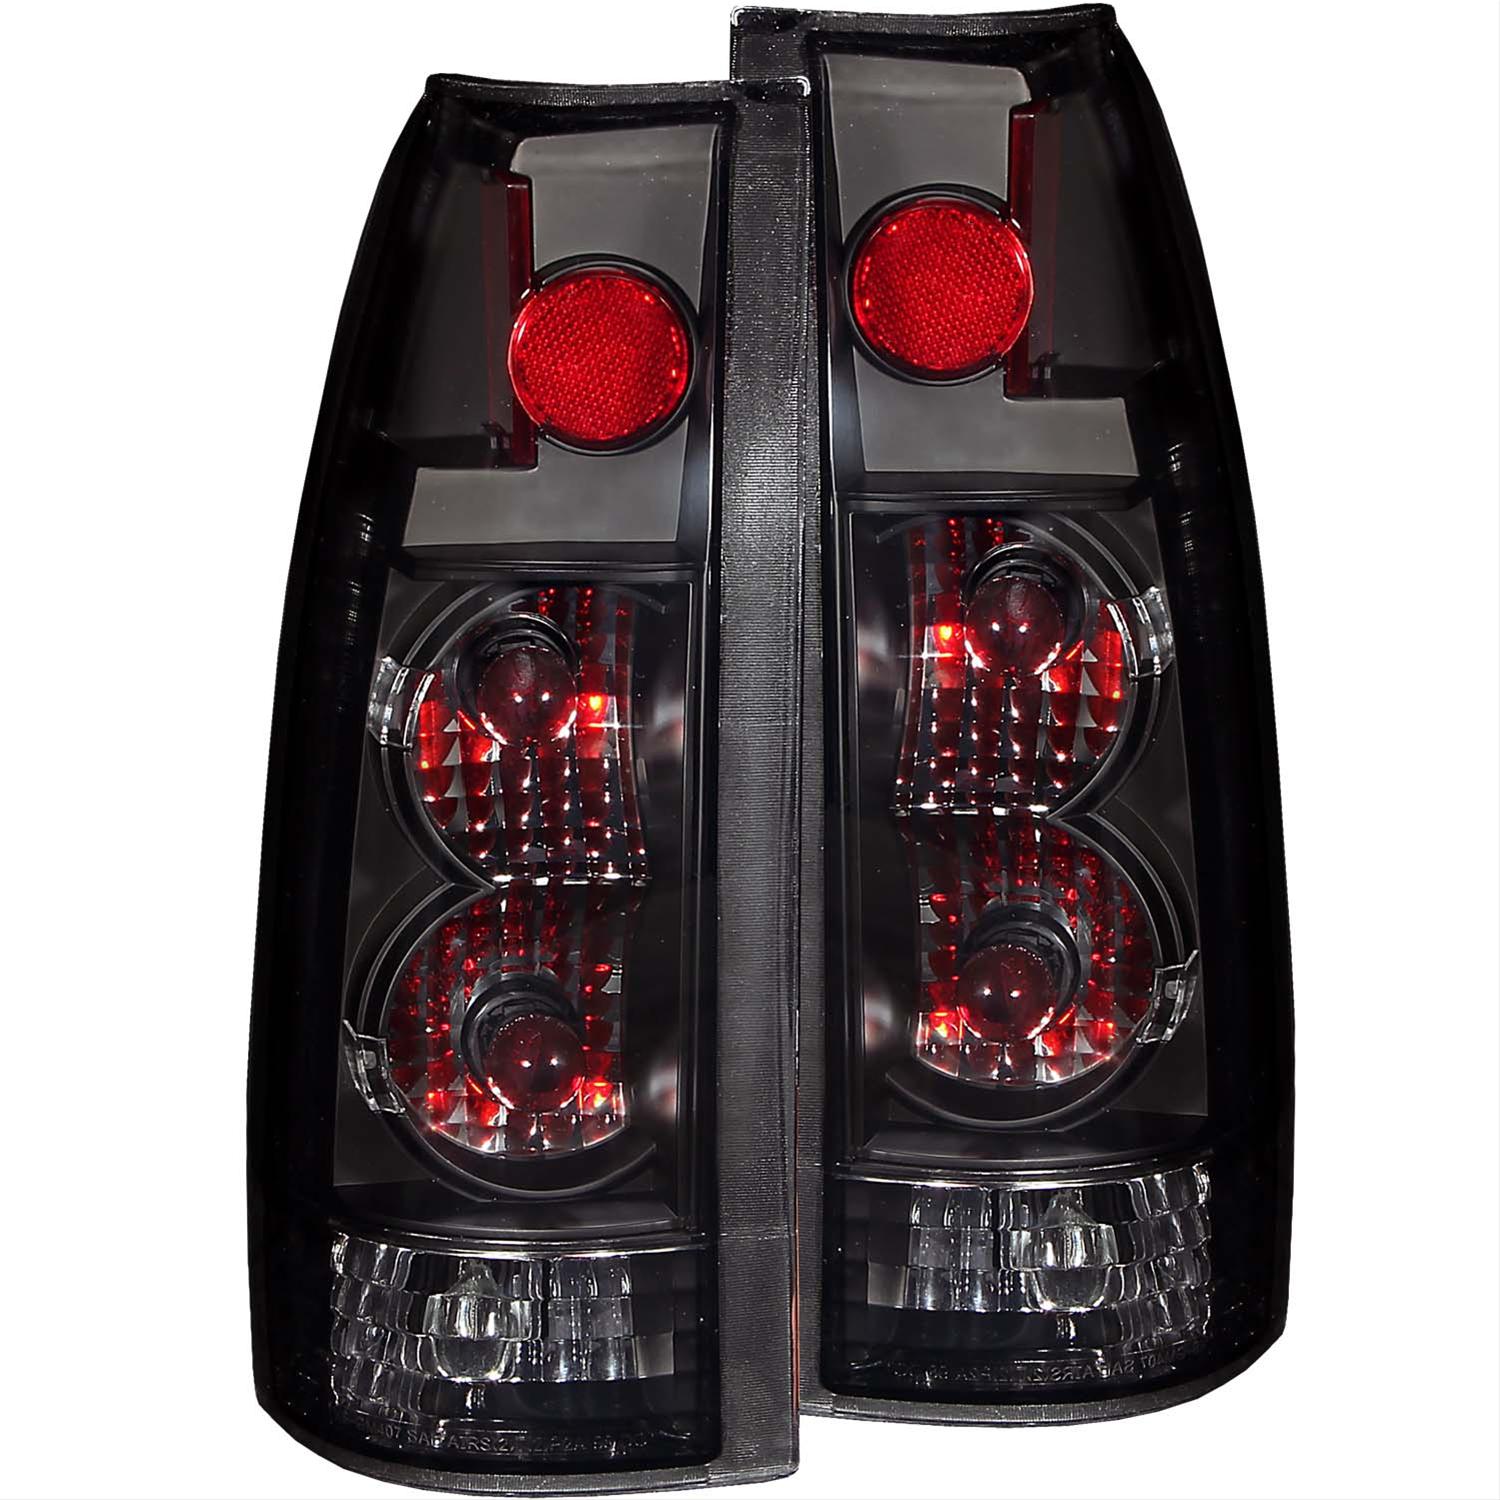 USテールライト Anzo USA 211060テールライトアセンブリ左右 ANZO USA 211060 Tail Light Assembly Left and Right